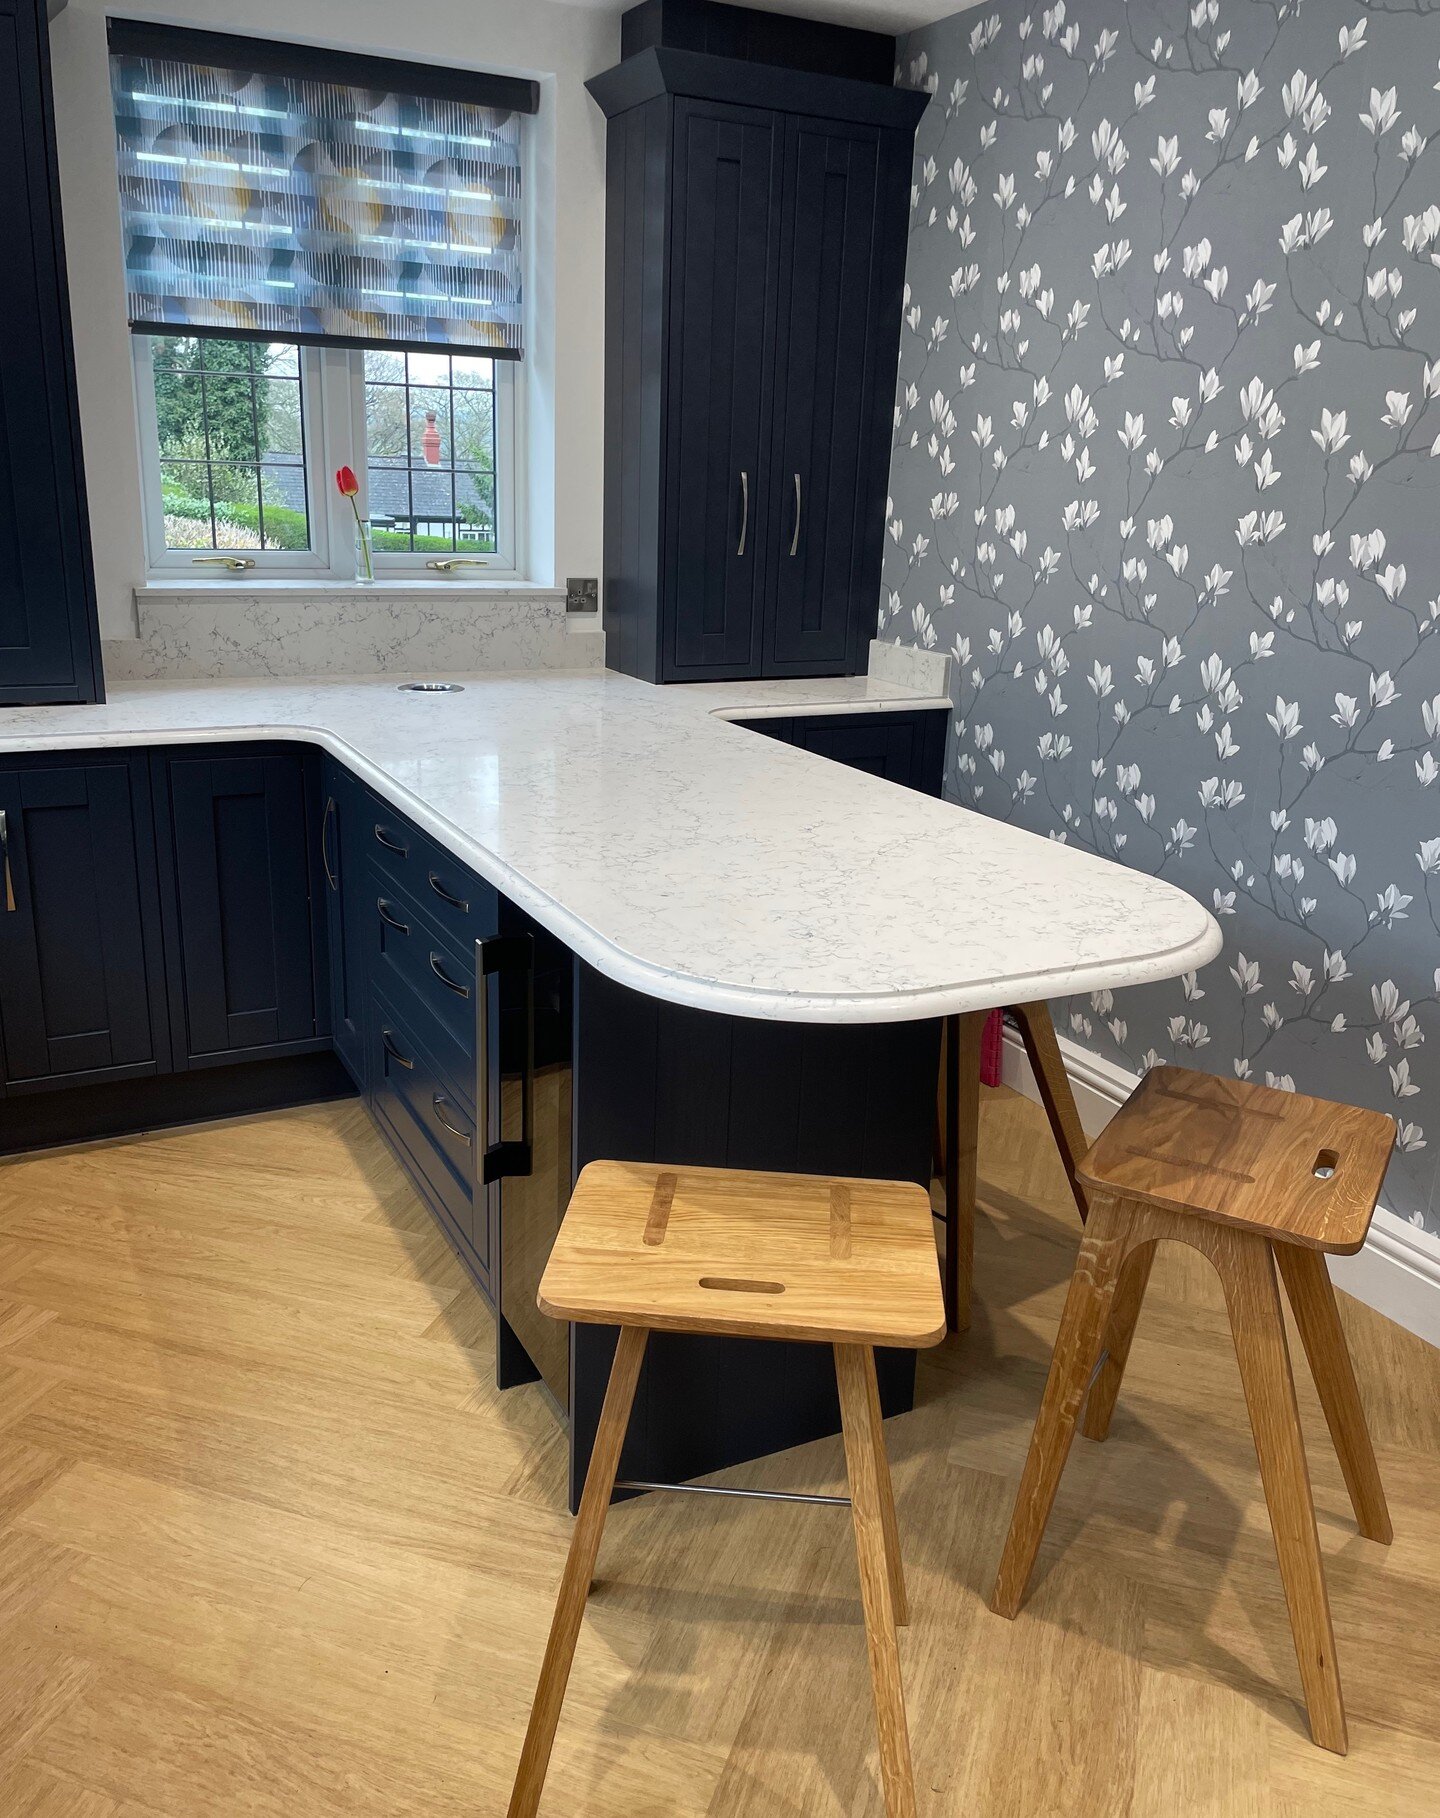 The @lauraashleyfittedfurniture Harwood range is perfect if you want to create an elegant and timeless kitchen, and looks especially stunning in Indigo, as shown in this recent project. 

This kitchen features @neffhomeuk appliances, including the am